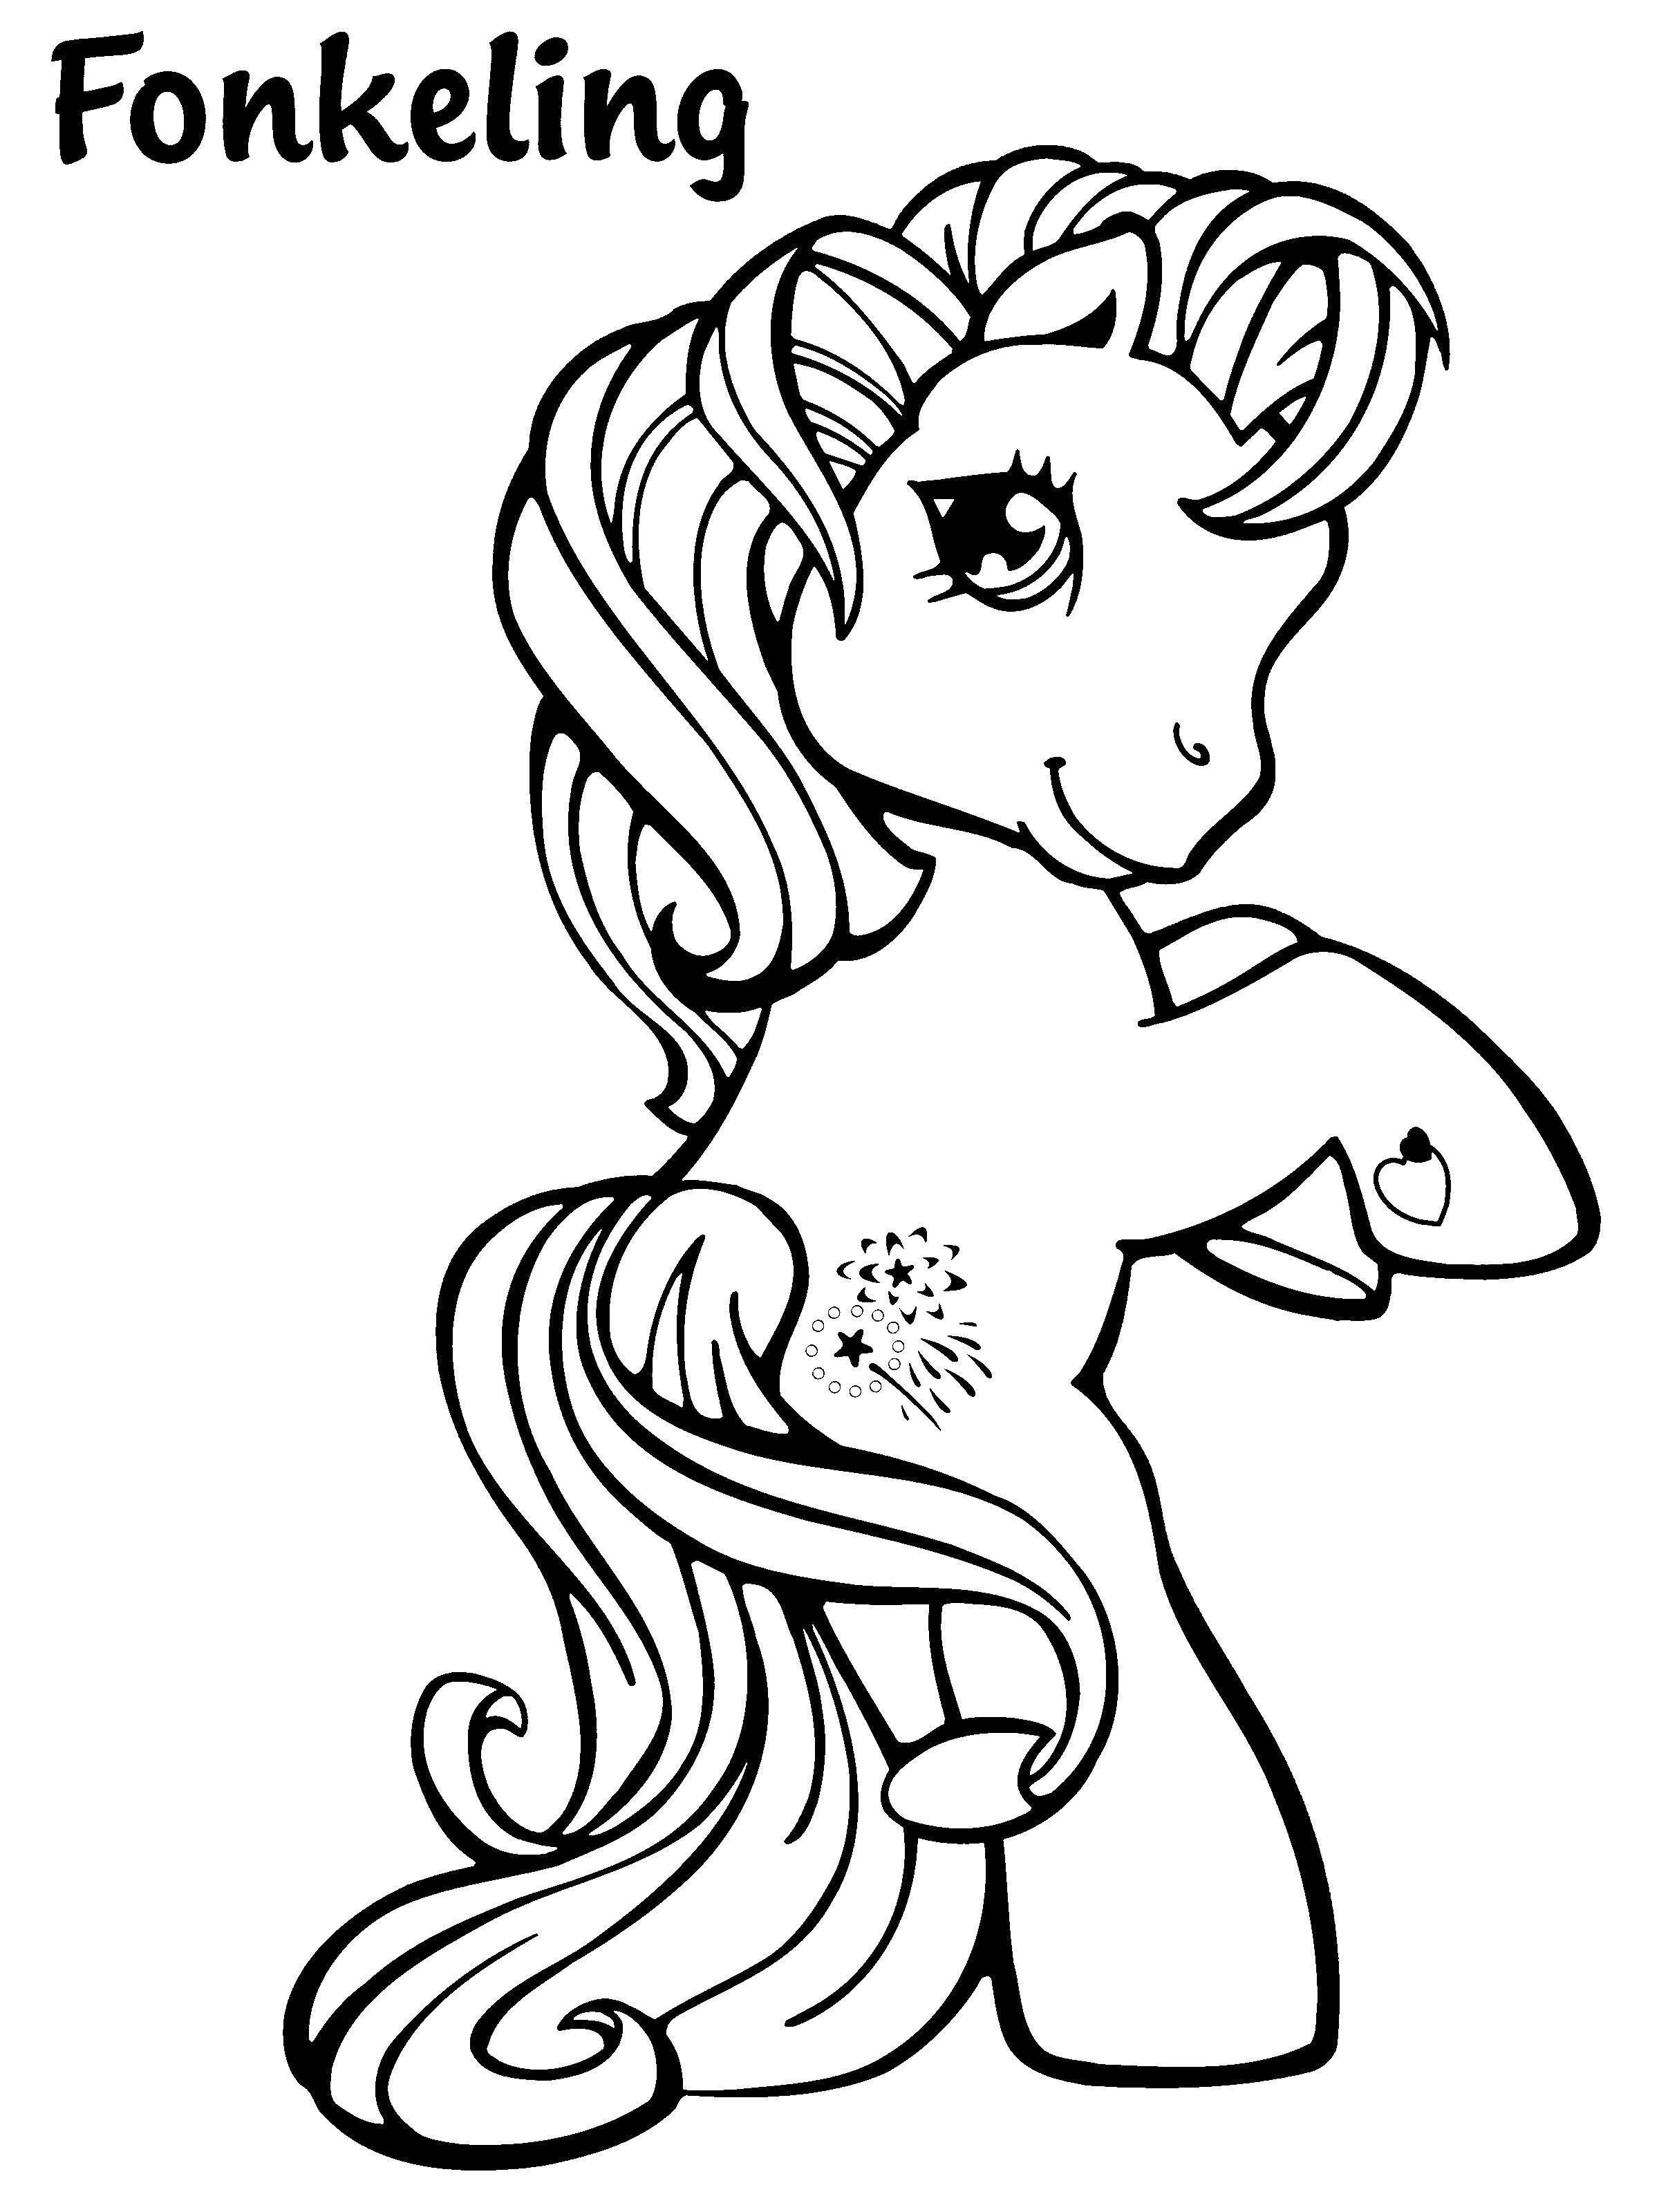 Coloring Pony. Category Ponies. Tags:  ponies.